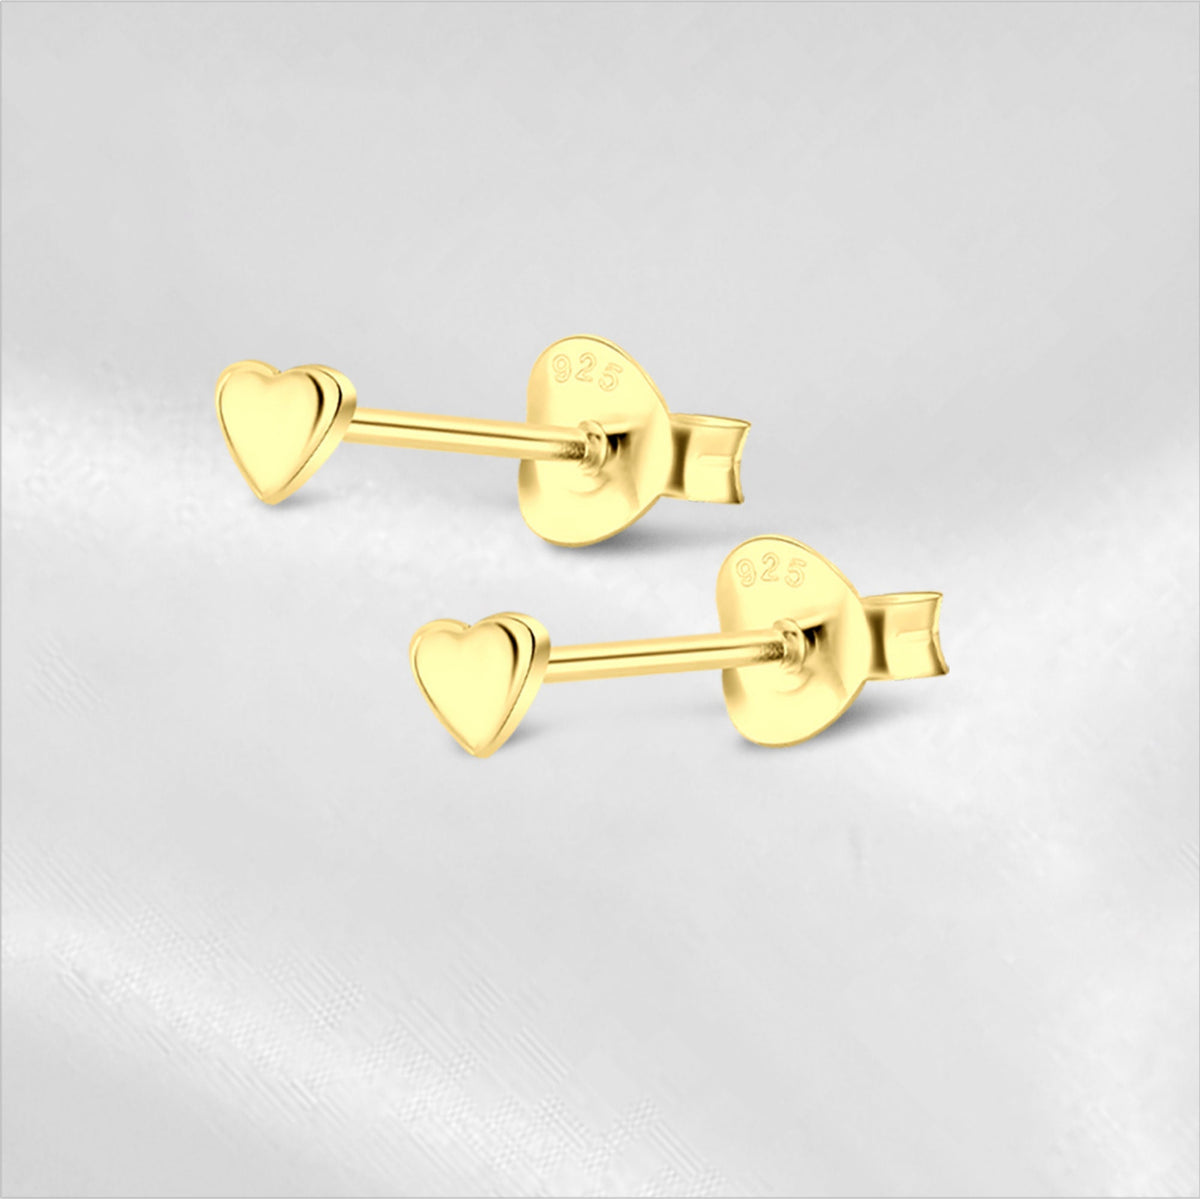 Small Heart Stud Earrings With Yellow Plating 3x3 mm